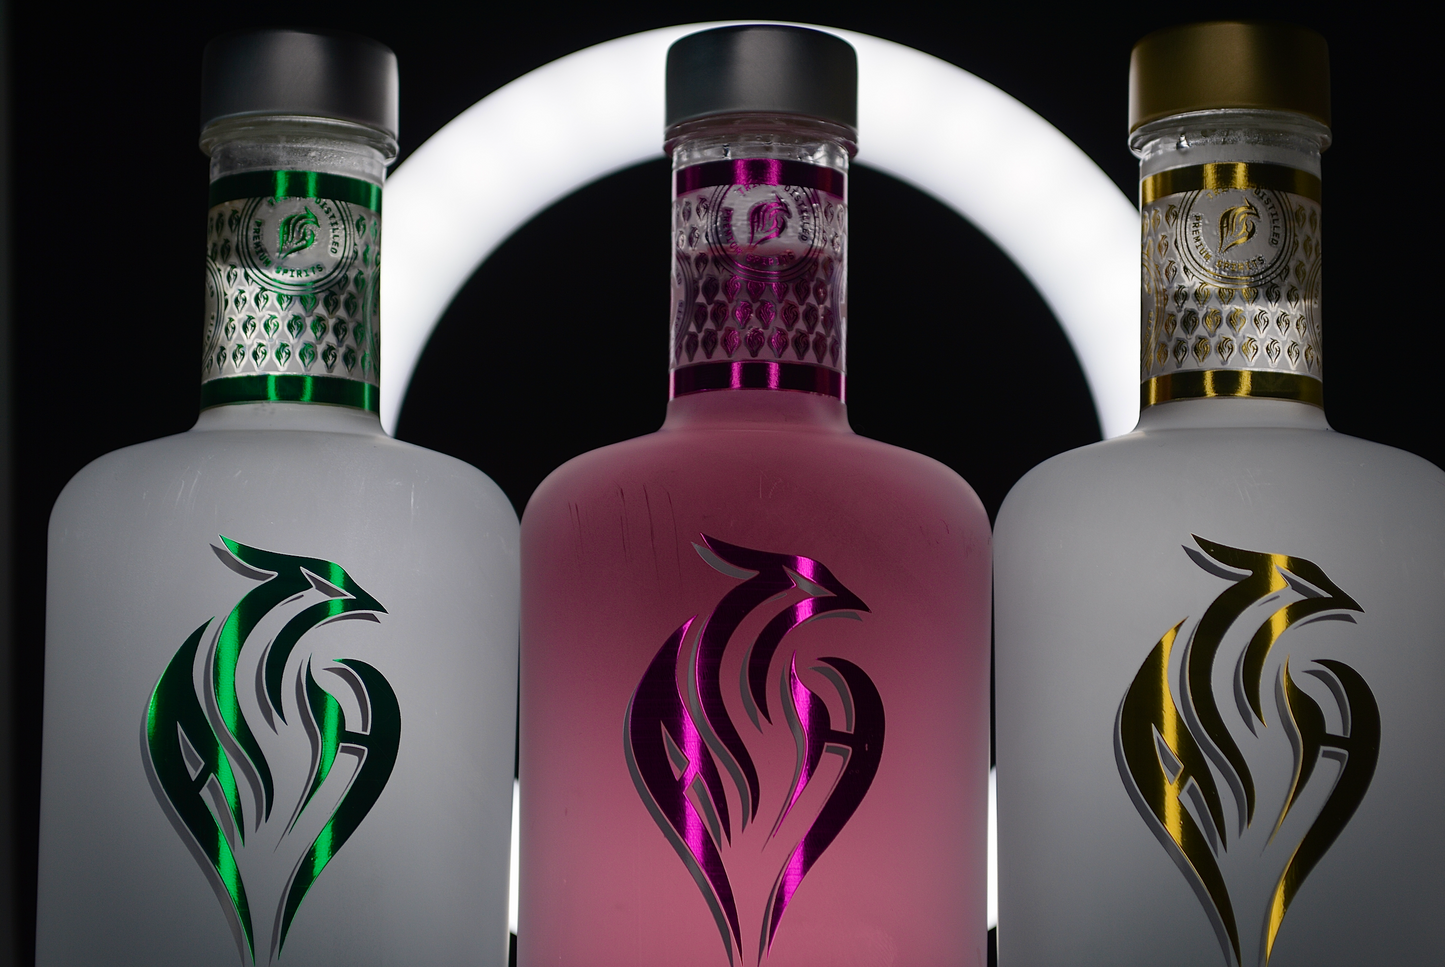 After Hours Premium Spirits - Multi-Pack